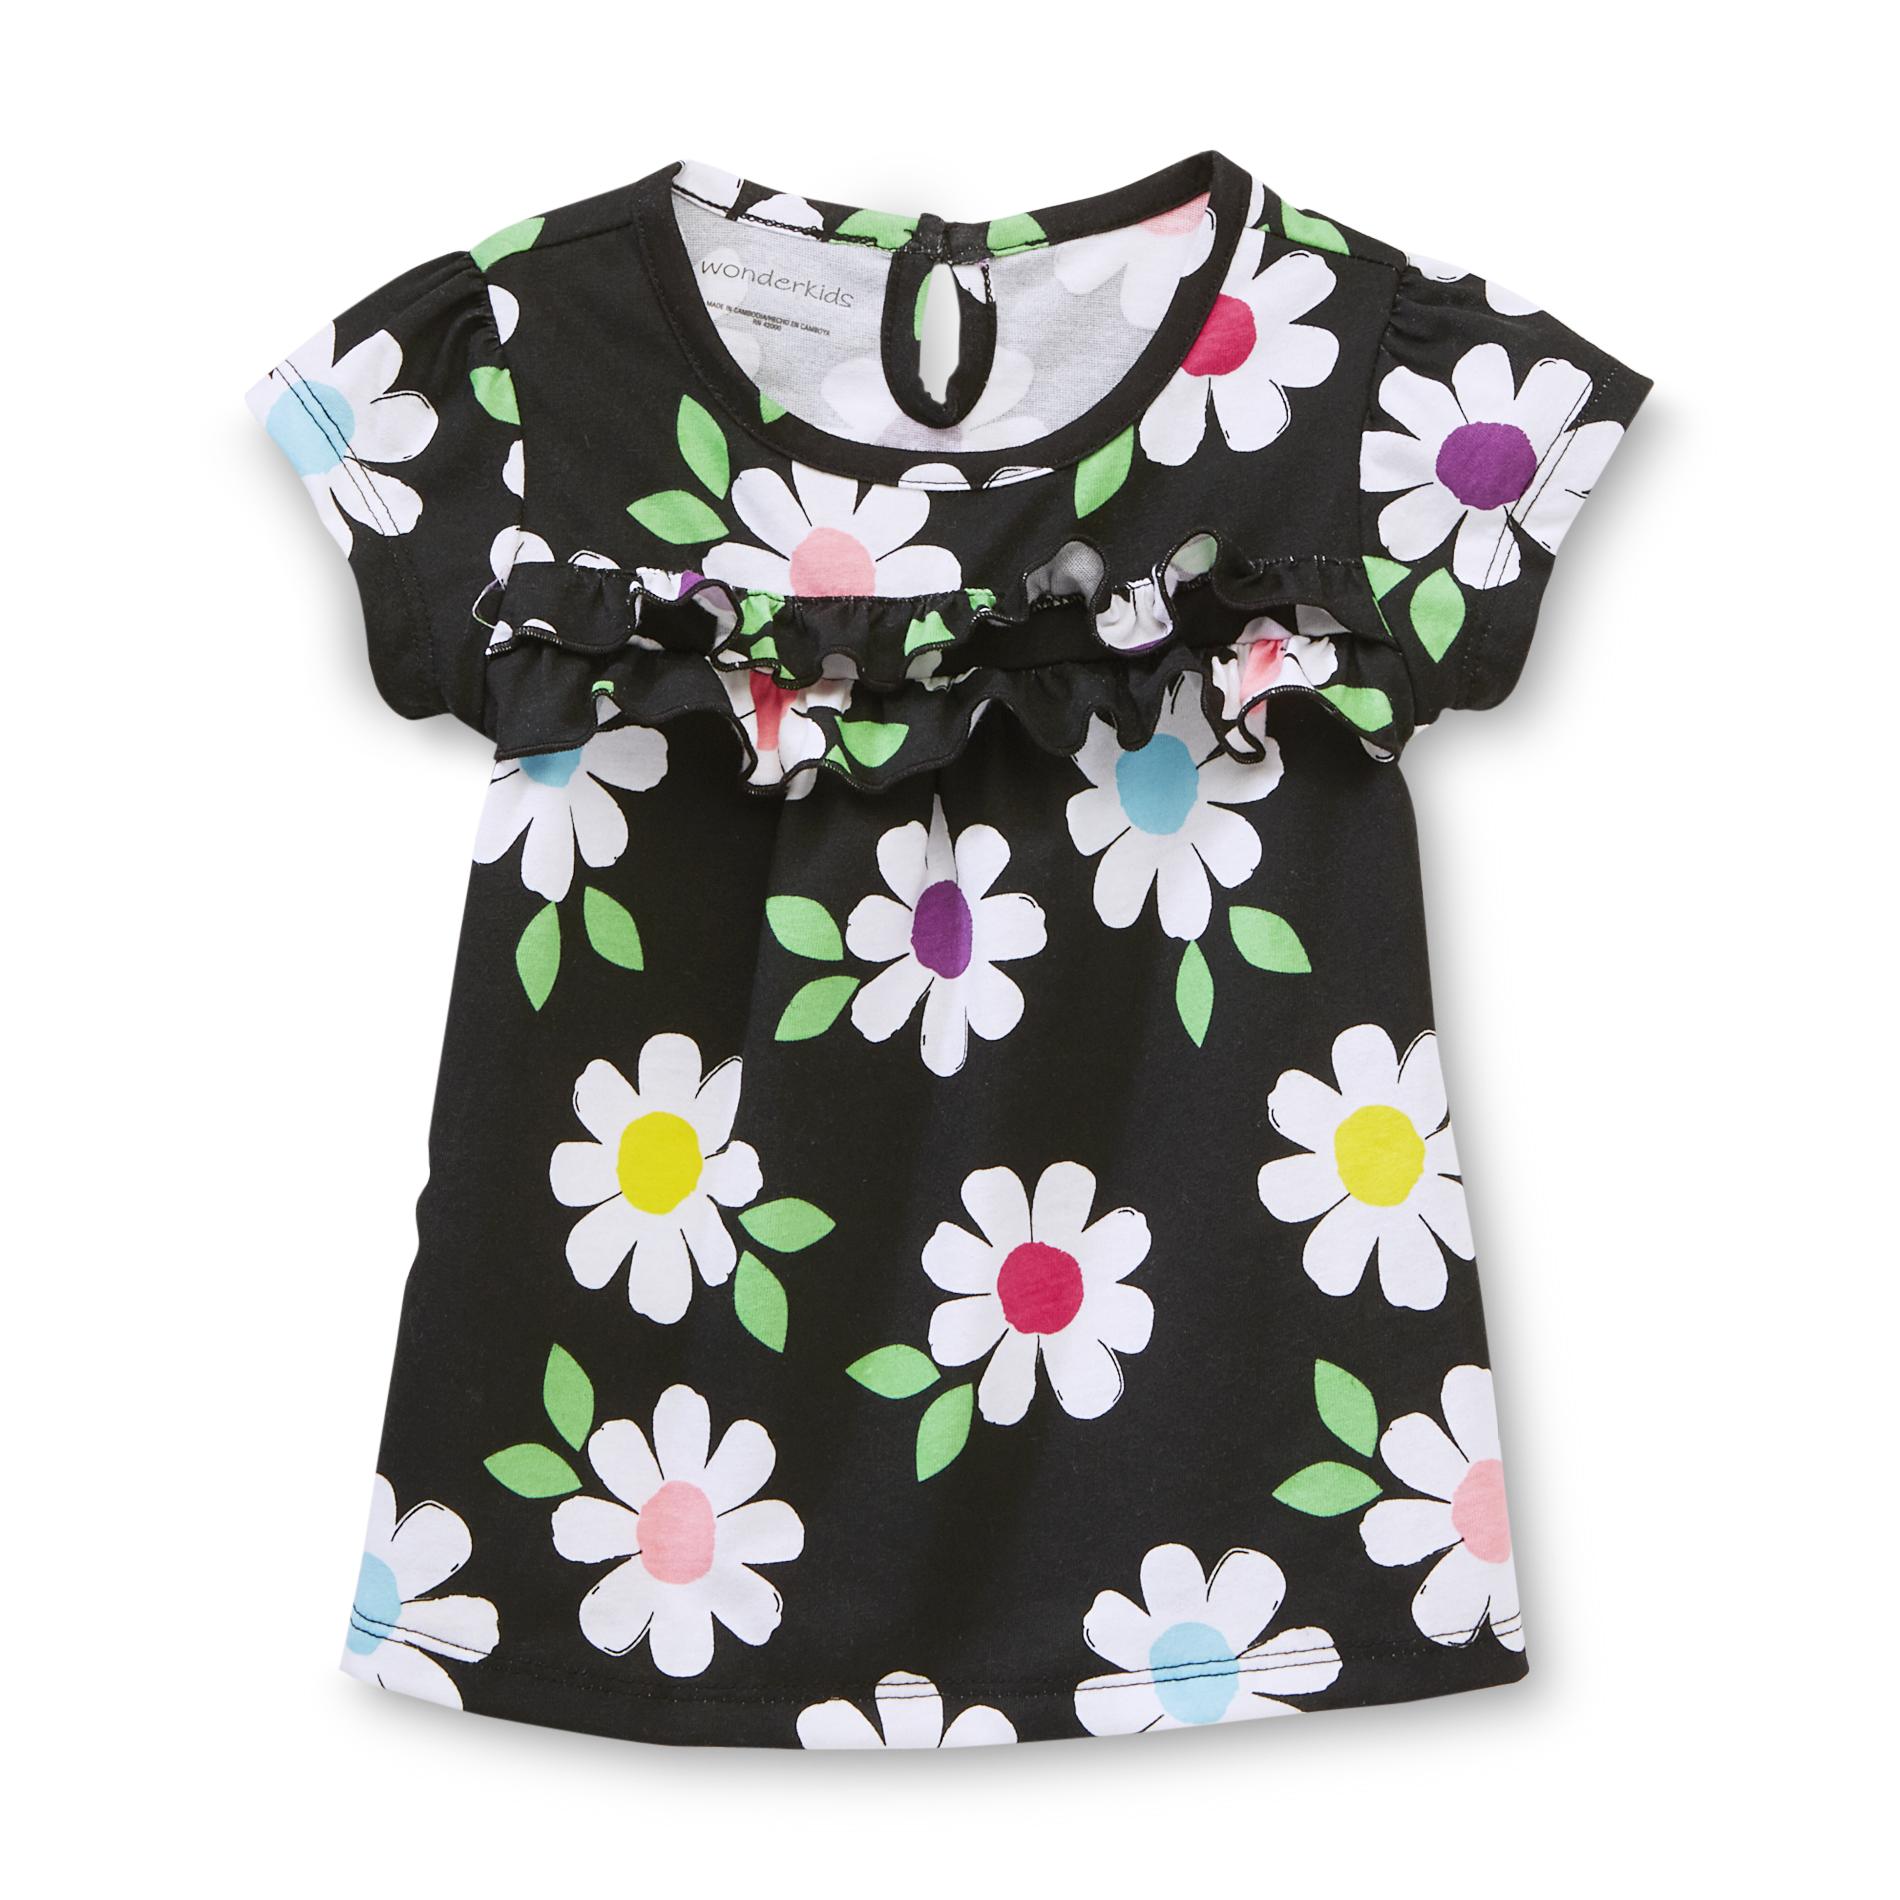 WonderKids Infant & Toddler Girl's Ruffle-Trim Tunic Top - Daisy Floral